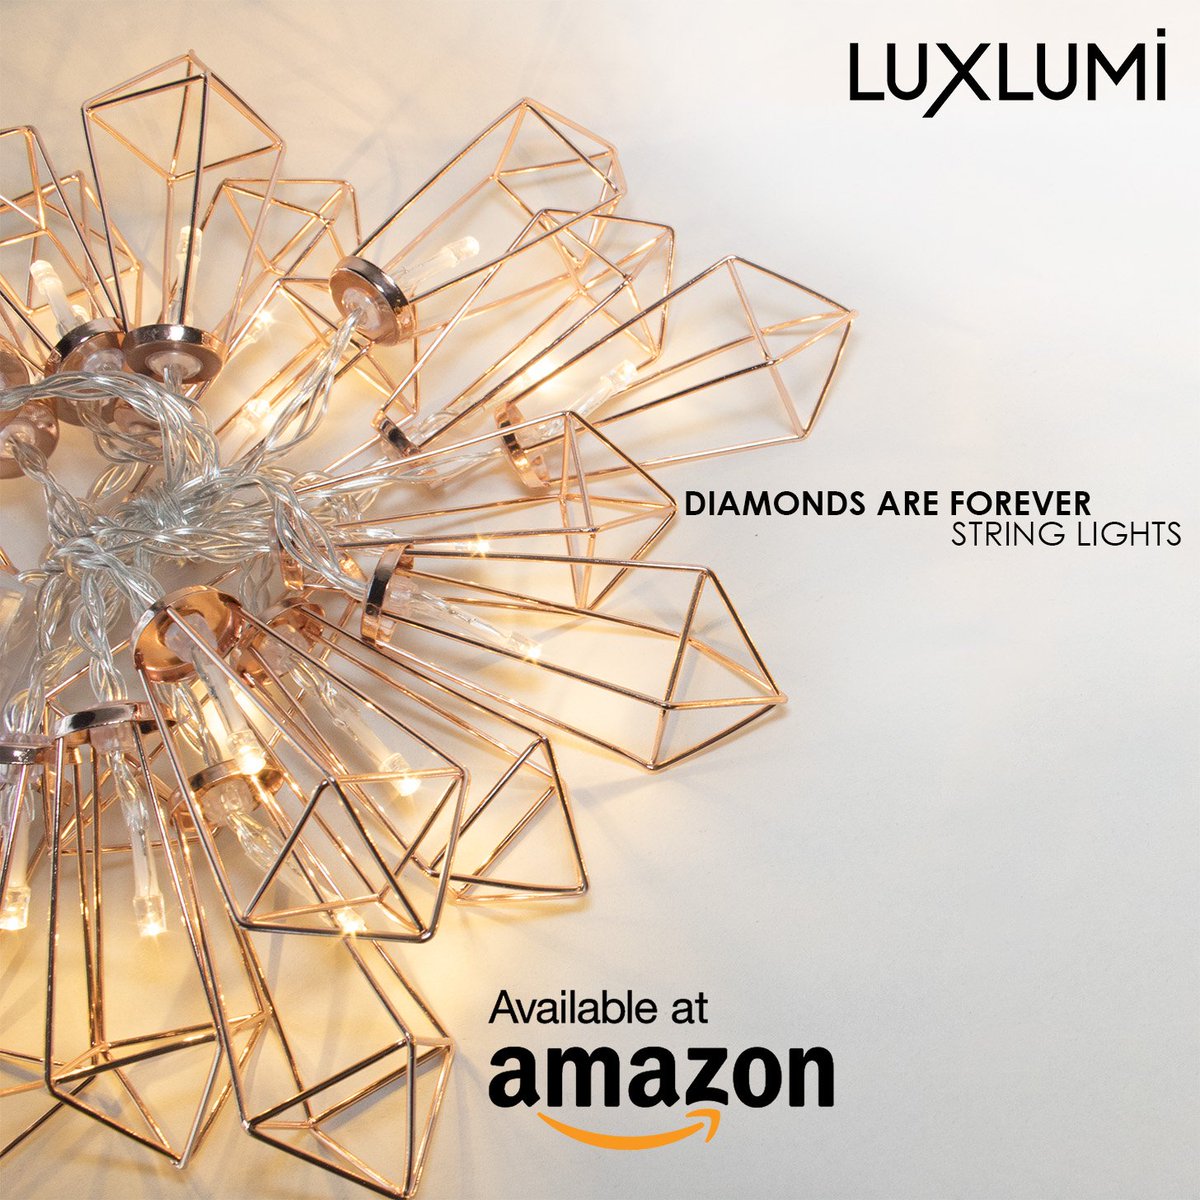 Our #bestselling Diamonds are Forever String Lights are great for #Rustic bridal & baby showers ✨Free 2-day shipping for #AmazonPrime members!

Tap to shop: goo.gl/SXaPd6

#babyshower #HomeDecor #bedroomdecor #nurserydecor #dormroomdecor #kidsroom